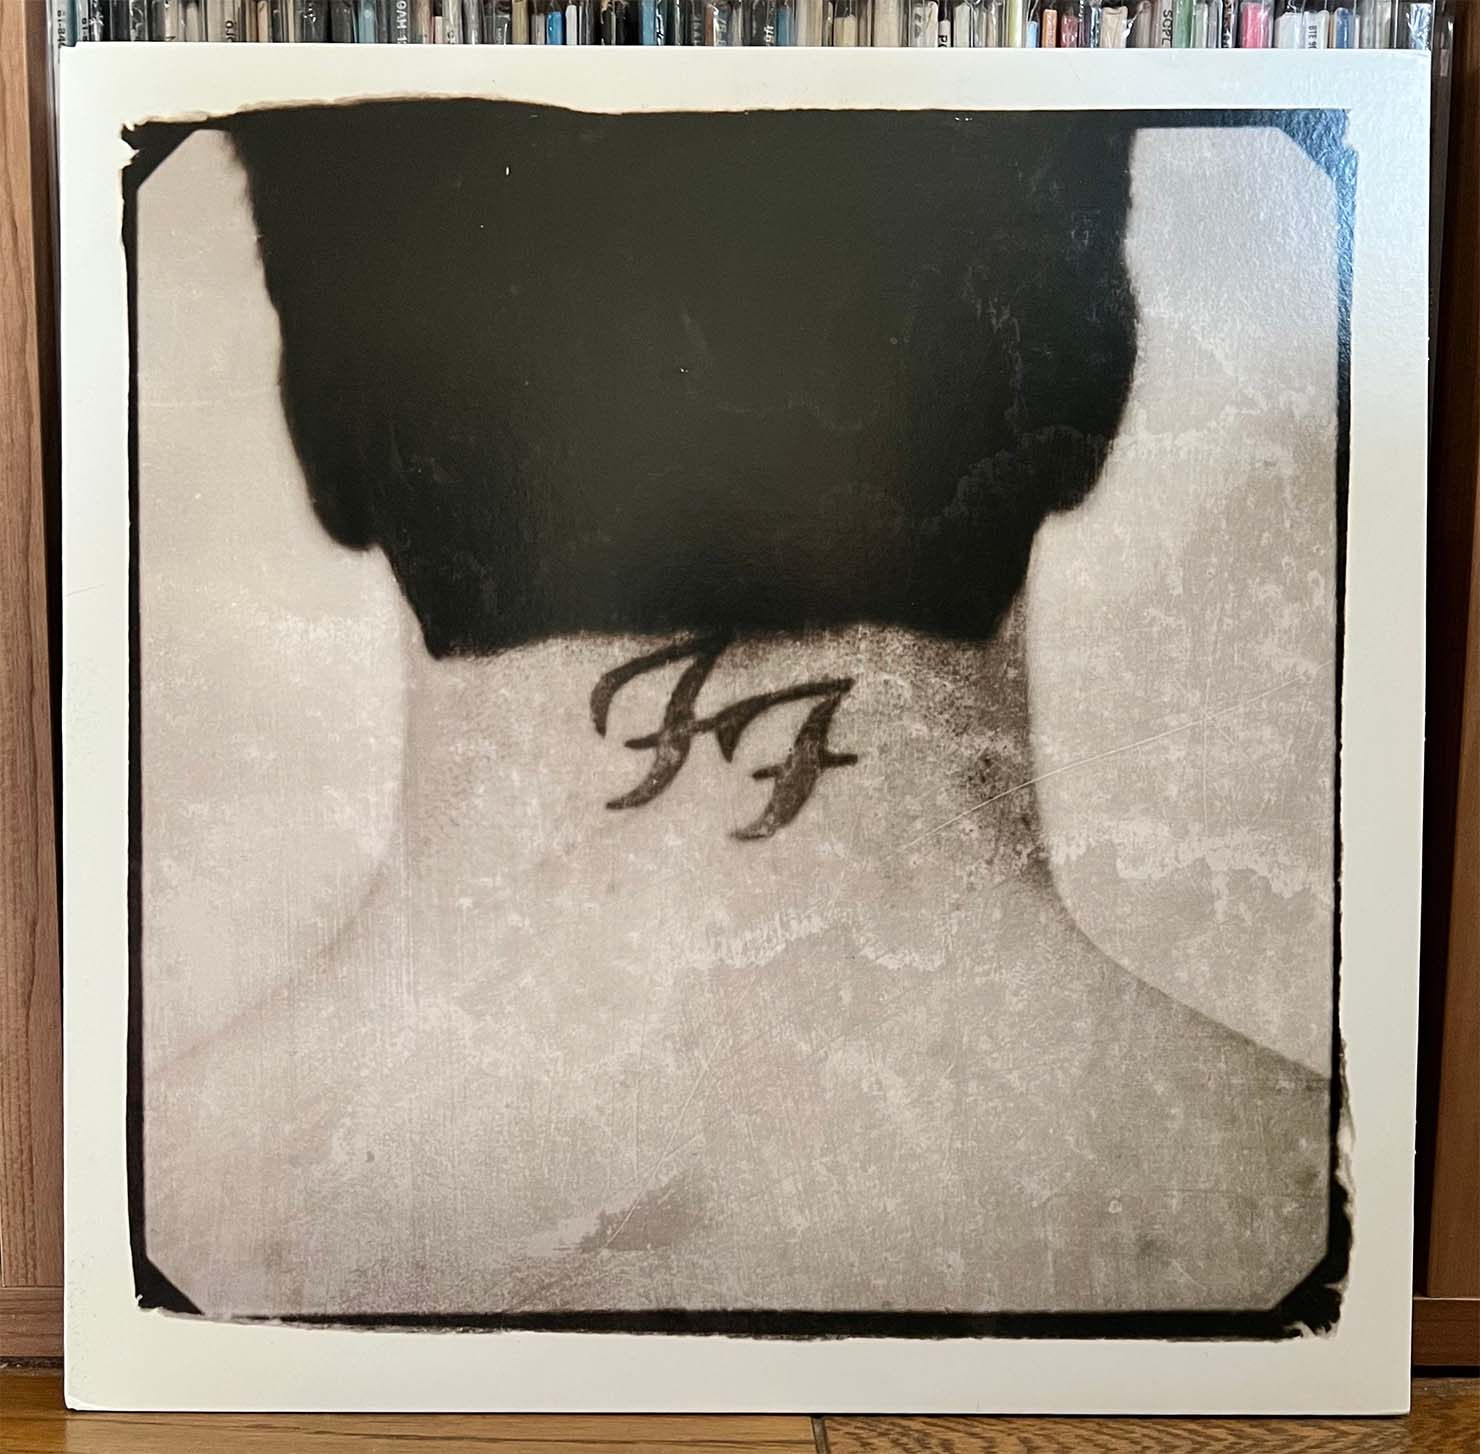 Learn To Fly / Foo Fighters